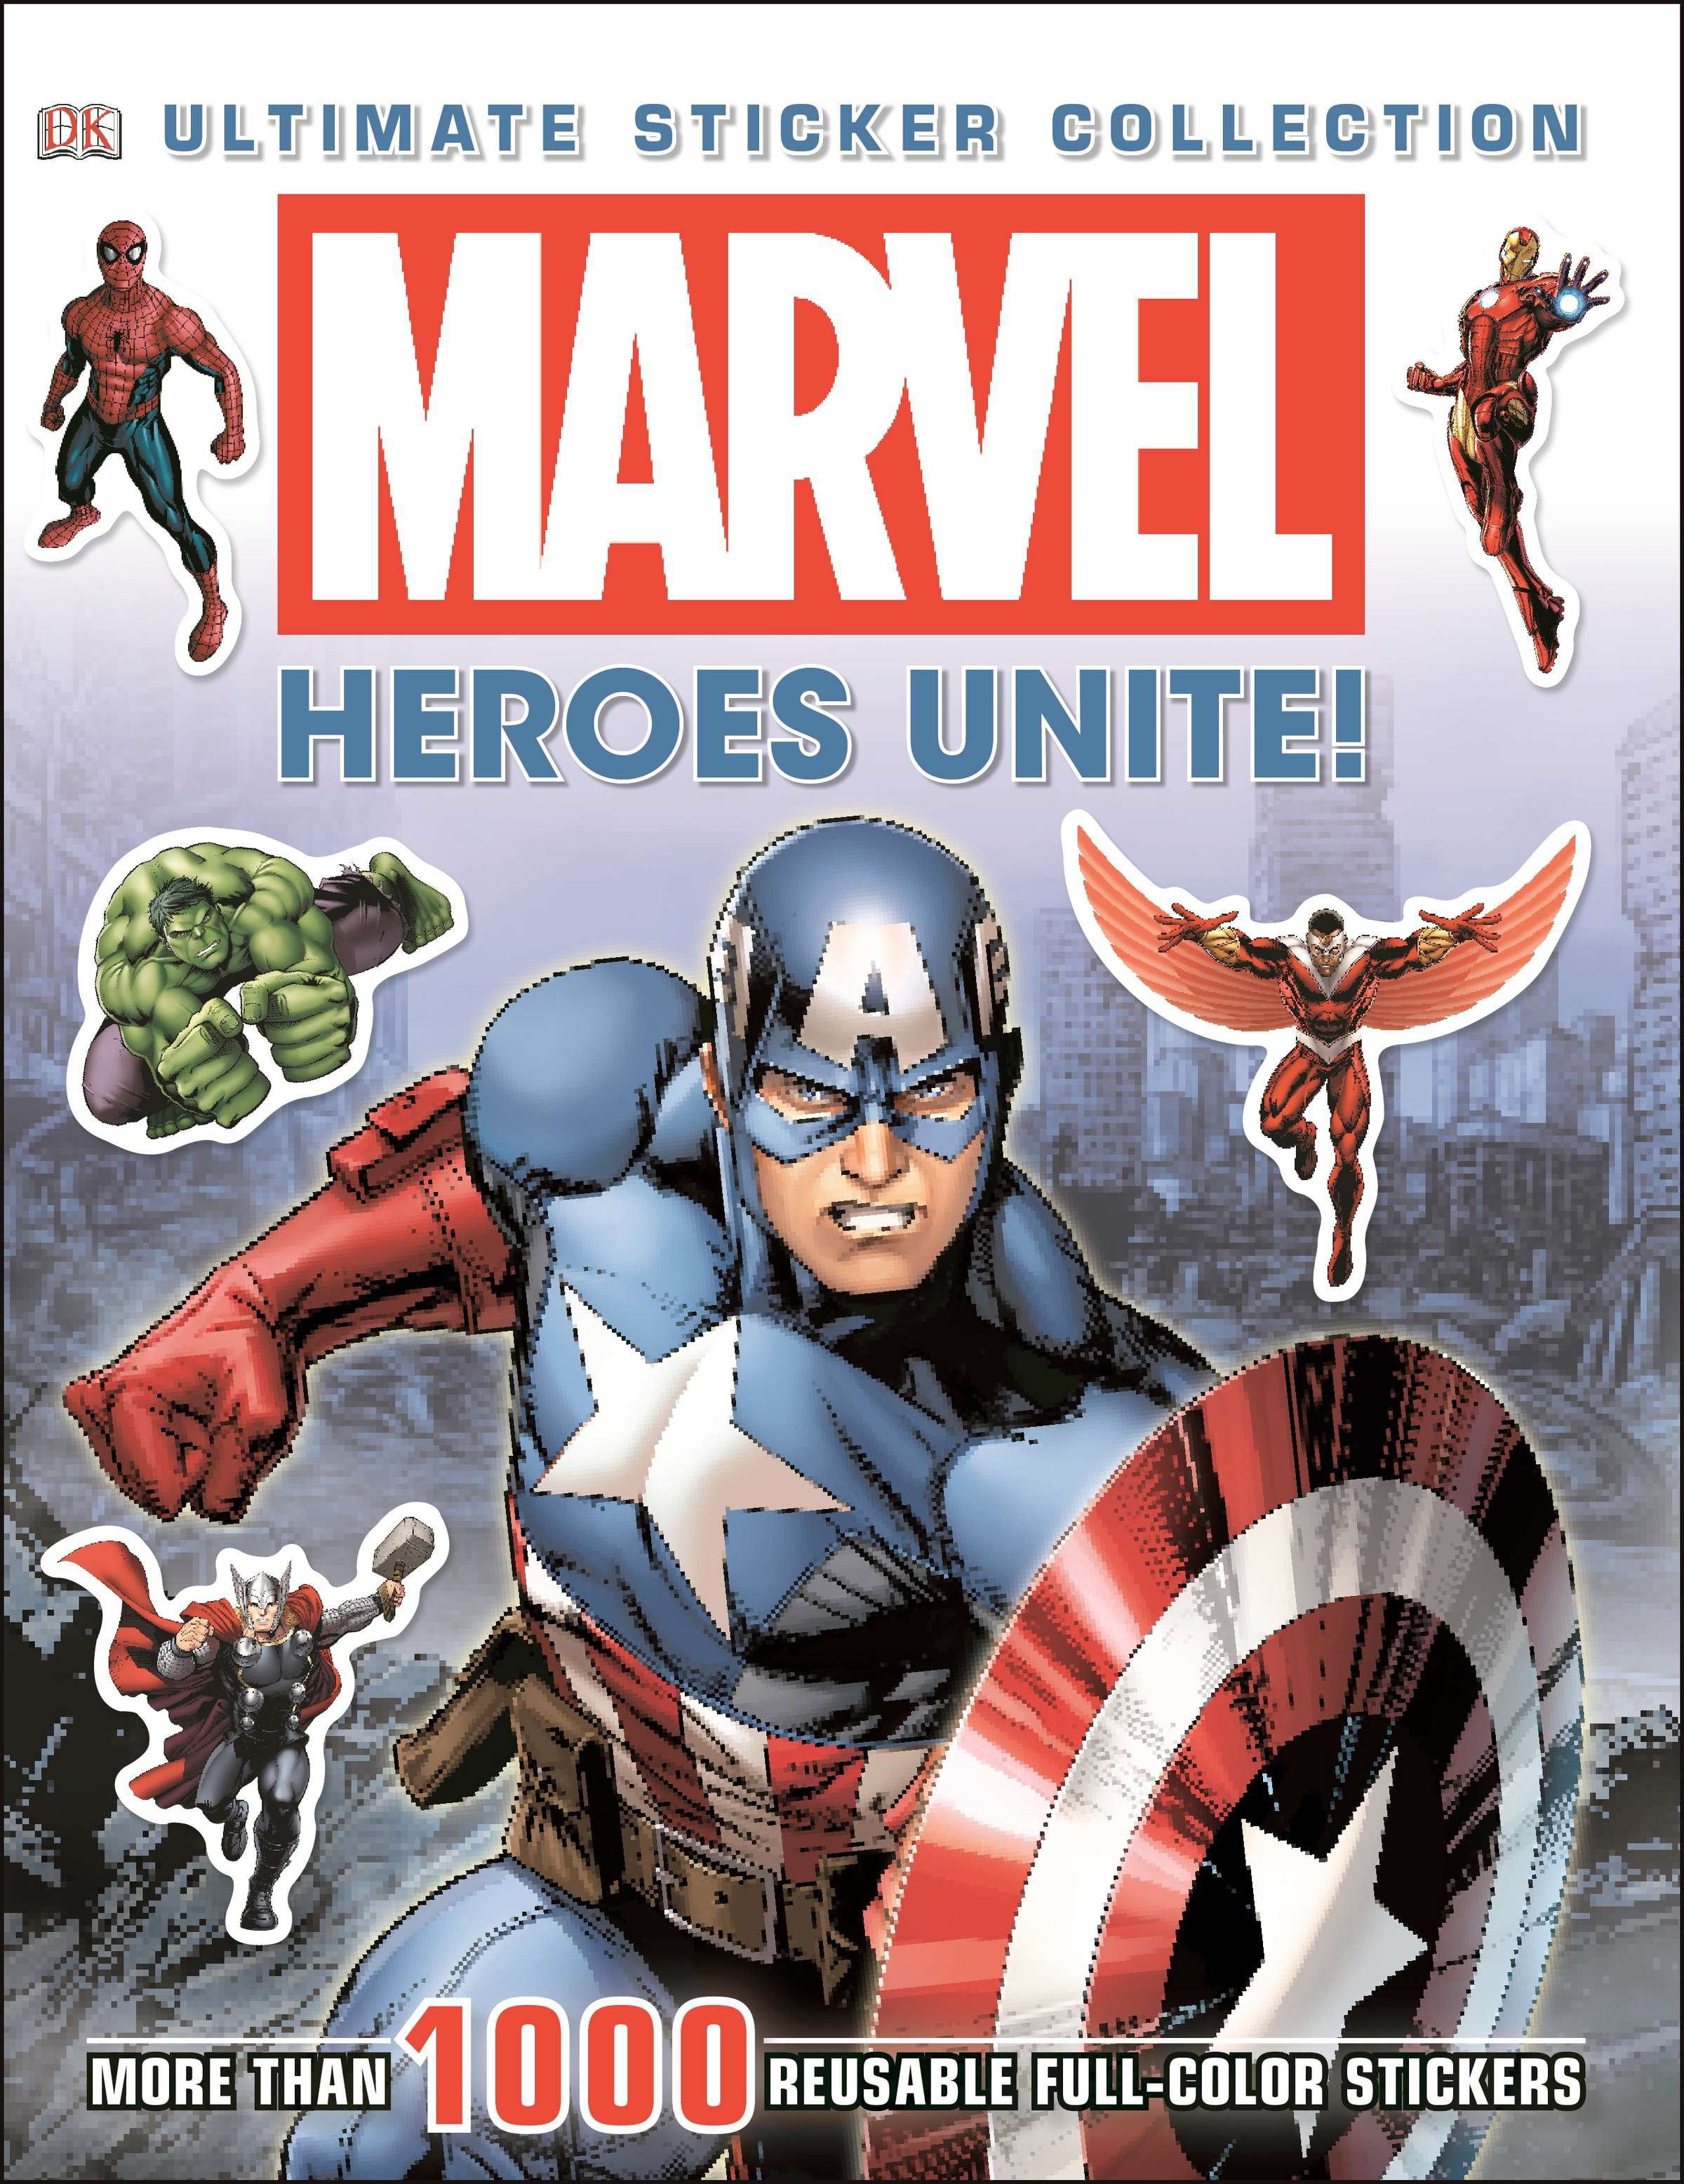 Ultimate-Sticker-Collection-Marvel-Heroes-Unite-More-Than-1000-Reusable-FullColor-Stickers-Ultimate-Sticker-Collections